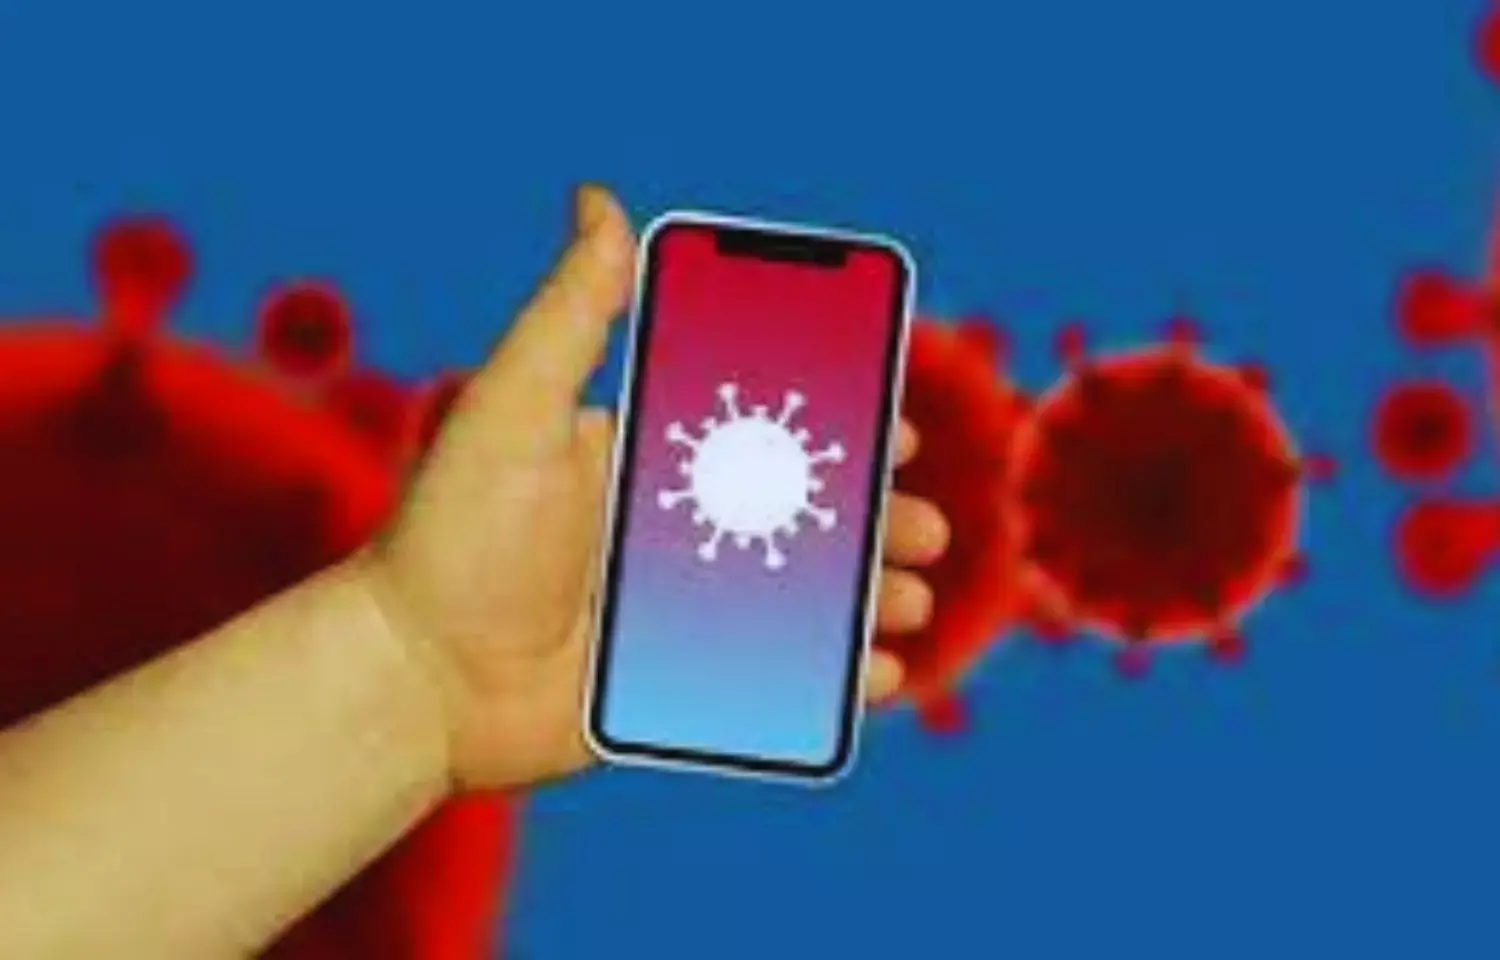 COVID-19 infection may be accurately detected by peoples voices using Mobile app and AI